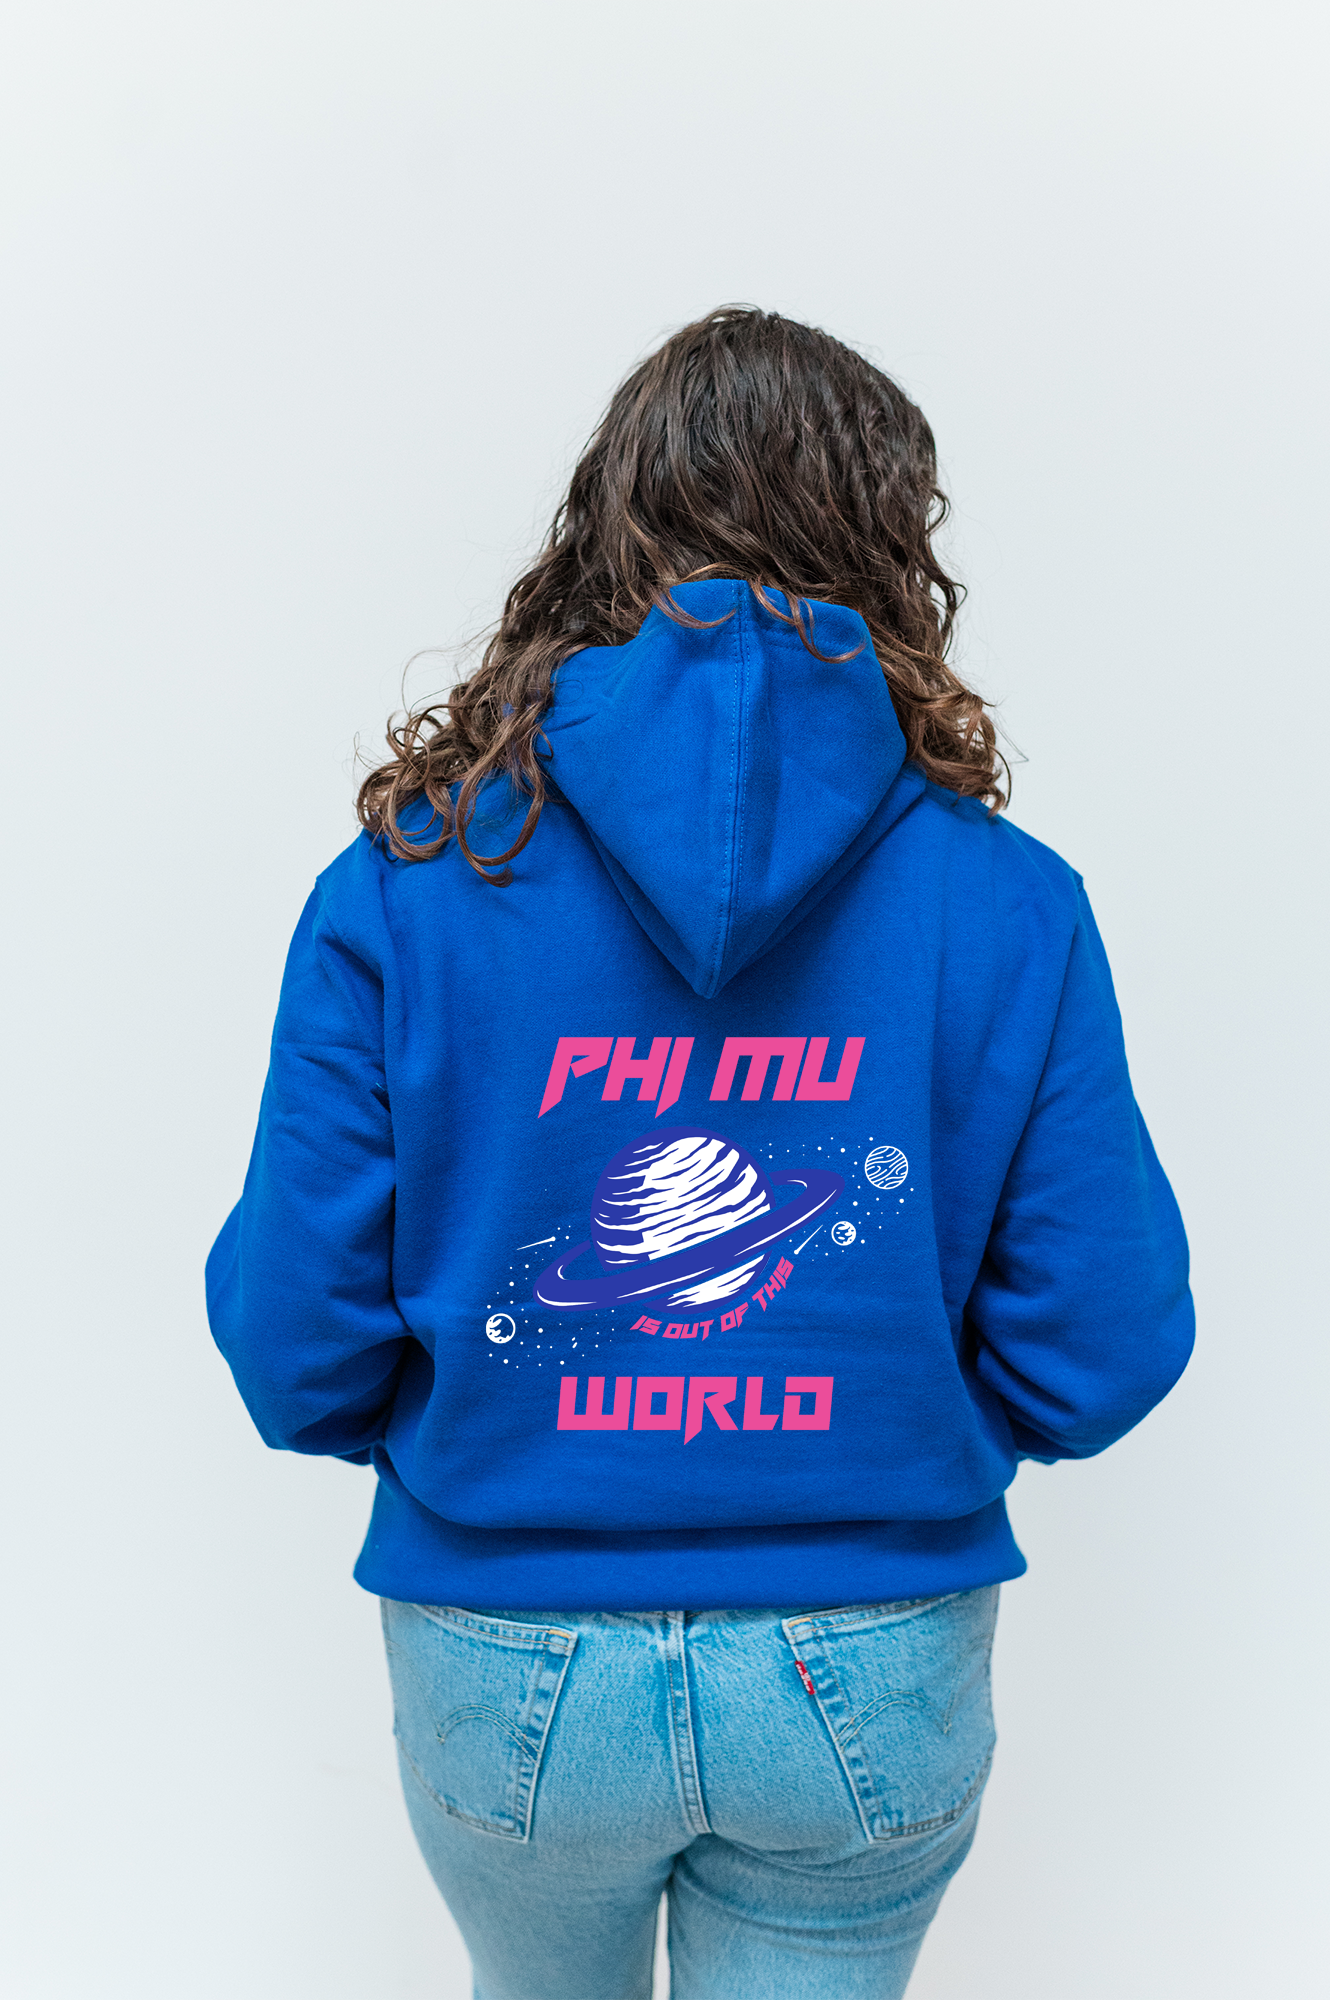 a woman wearing a blue hoodie with a pink logo on it